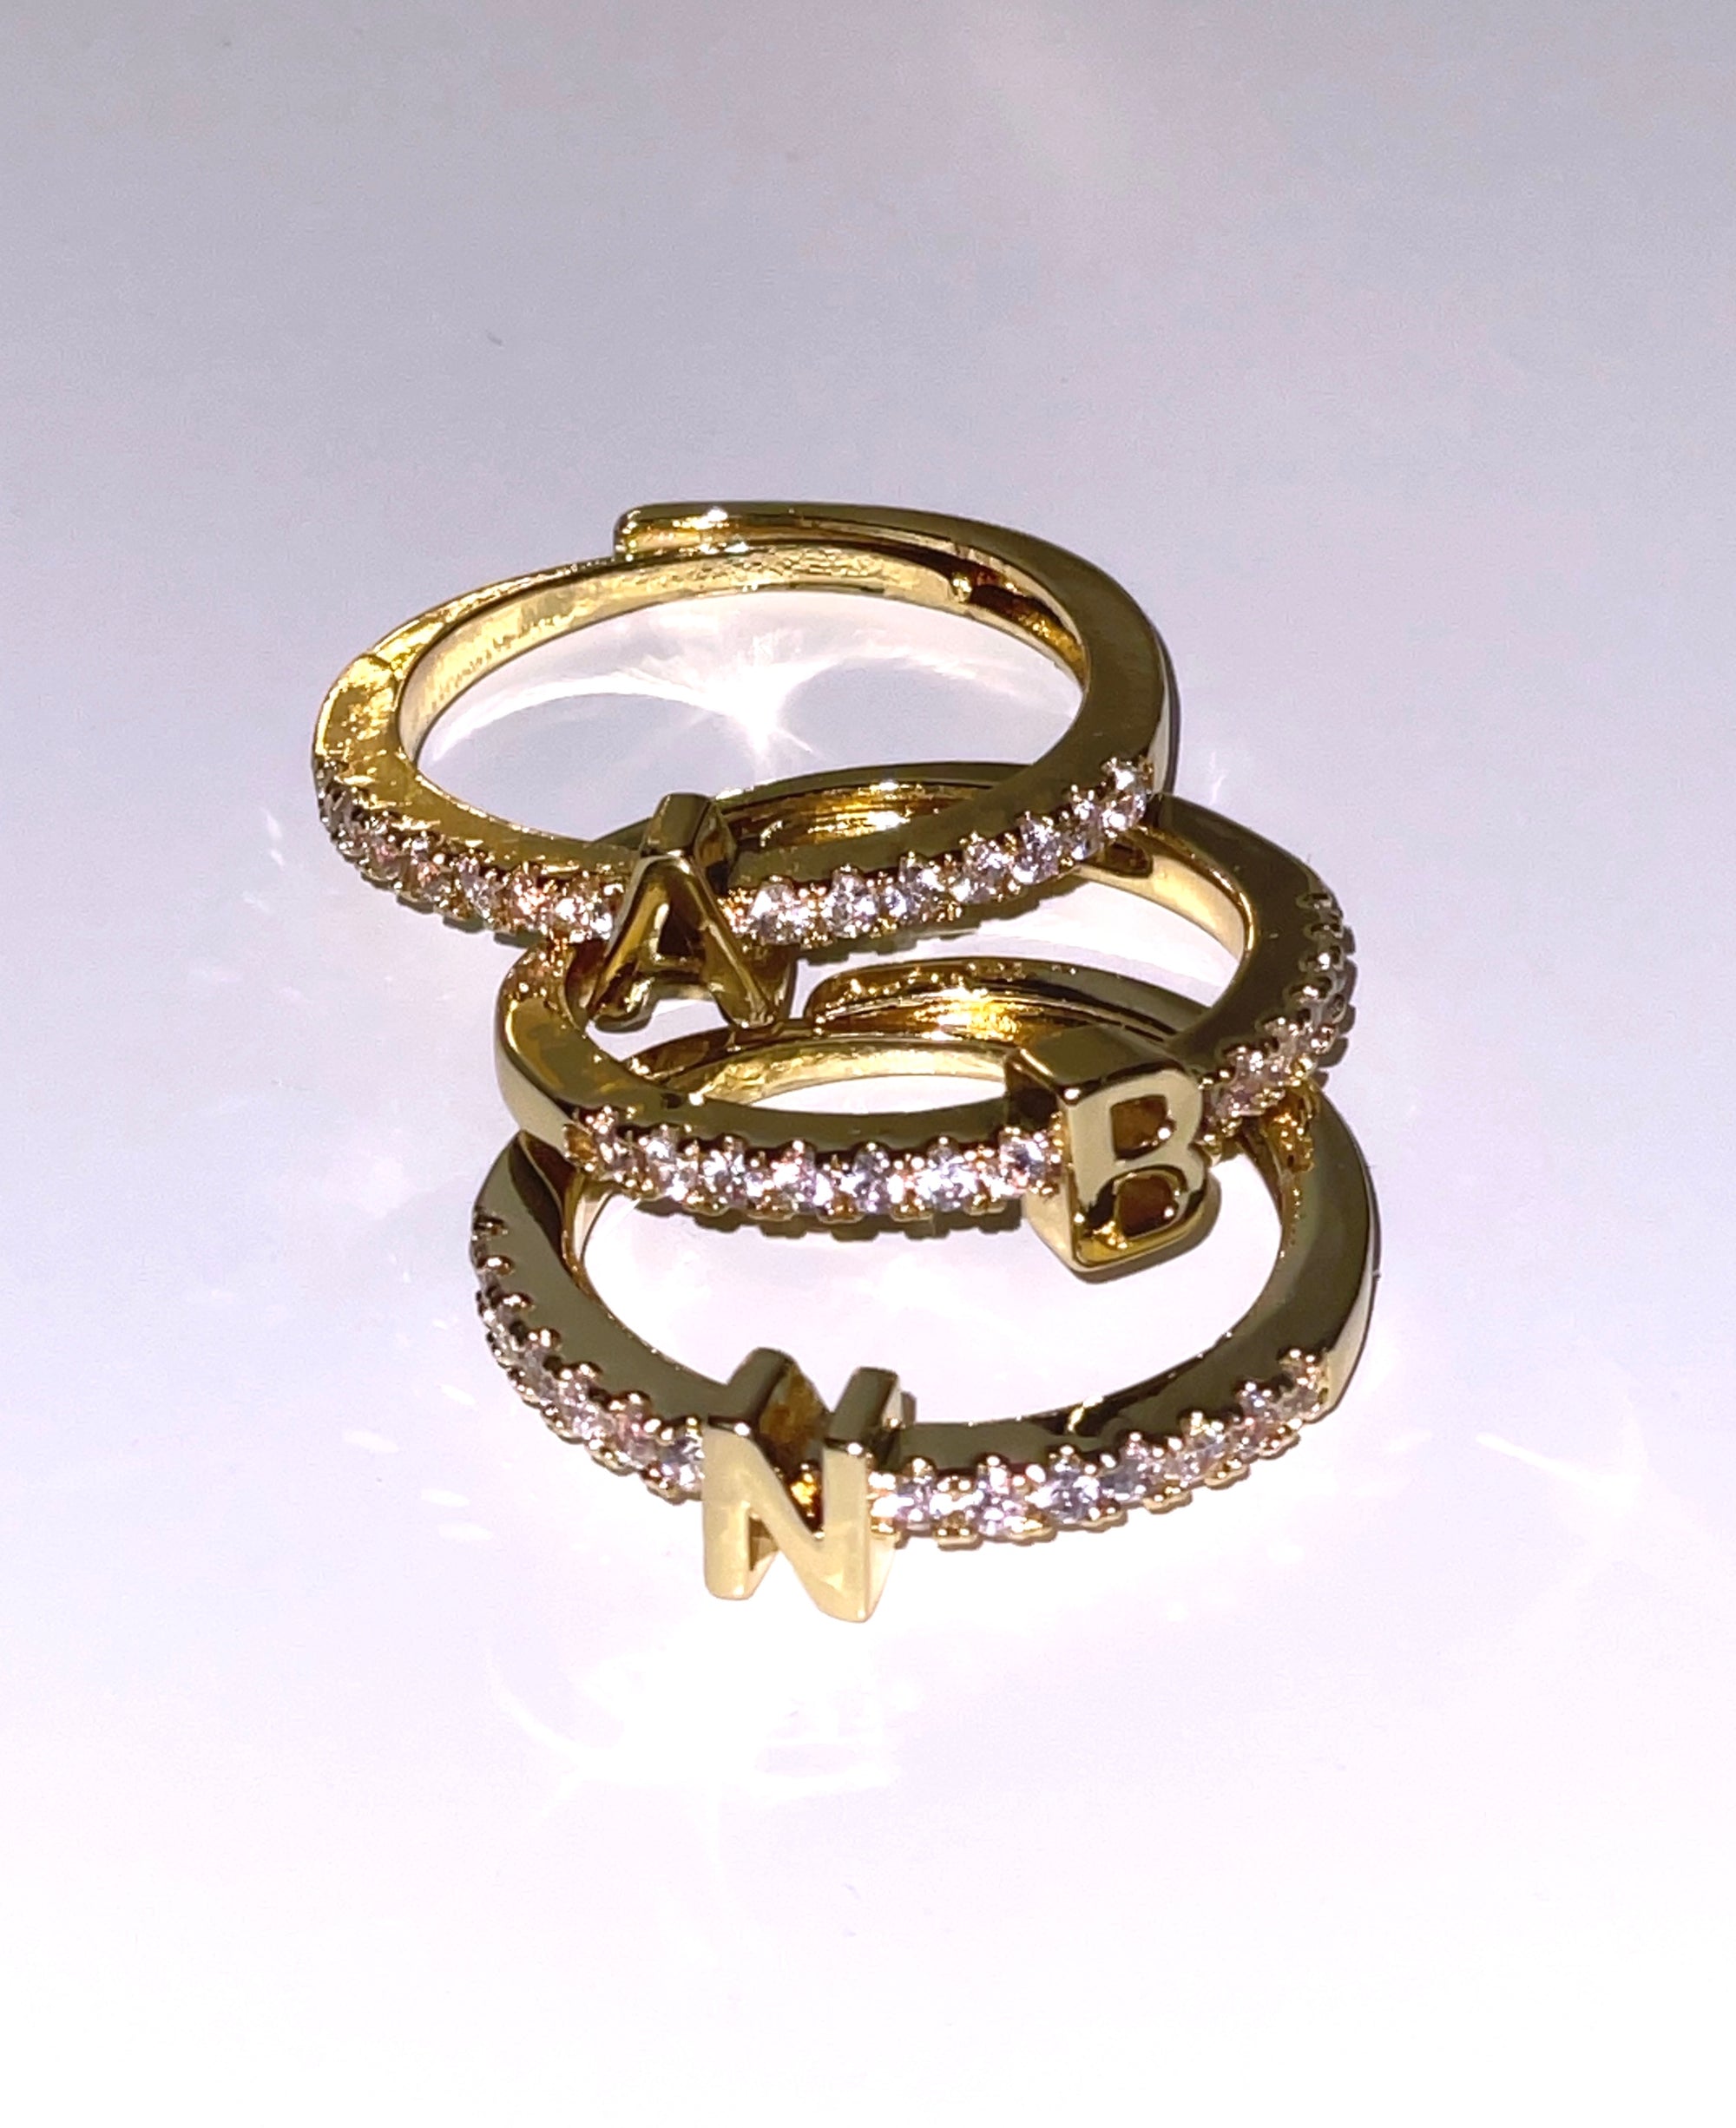 ADJUSTABLE INITIAL STACKING RING